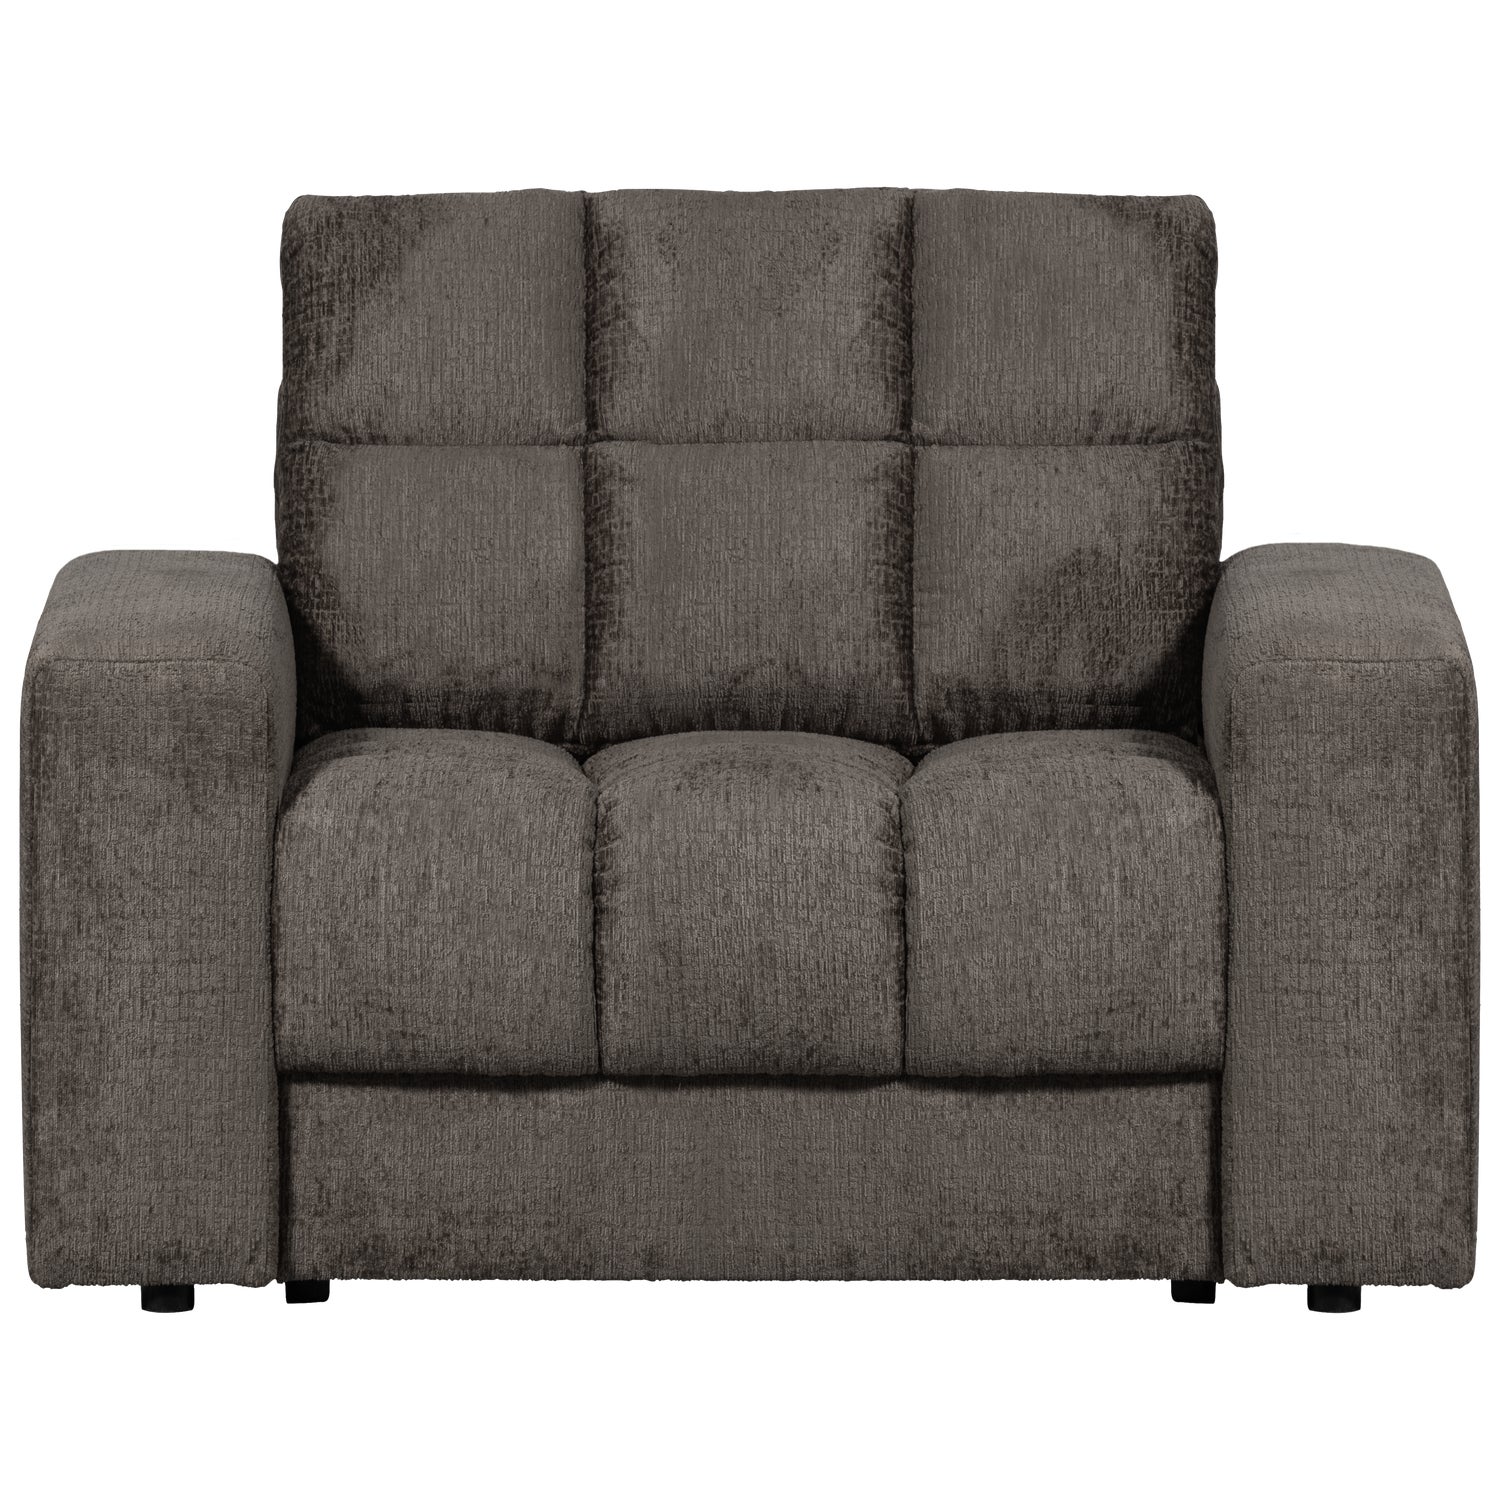 379003-MO-01_VS_WE_Second_date_fauteuil_structure_velvet_mountain.png?auto=webp&format=png&width=1500&height=1500